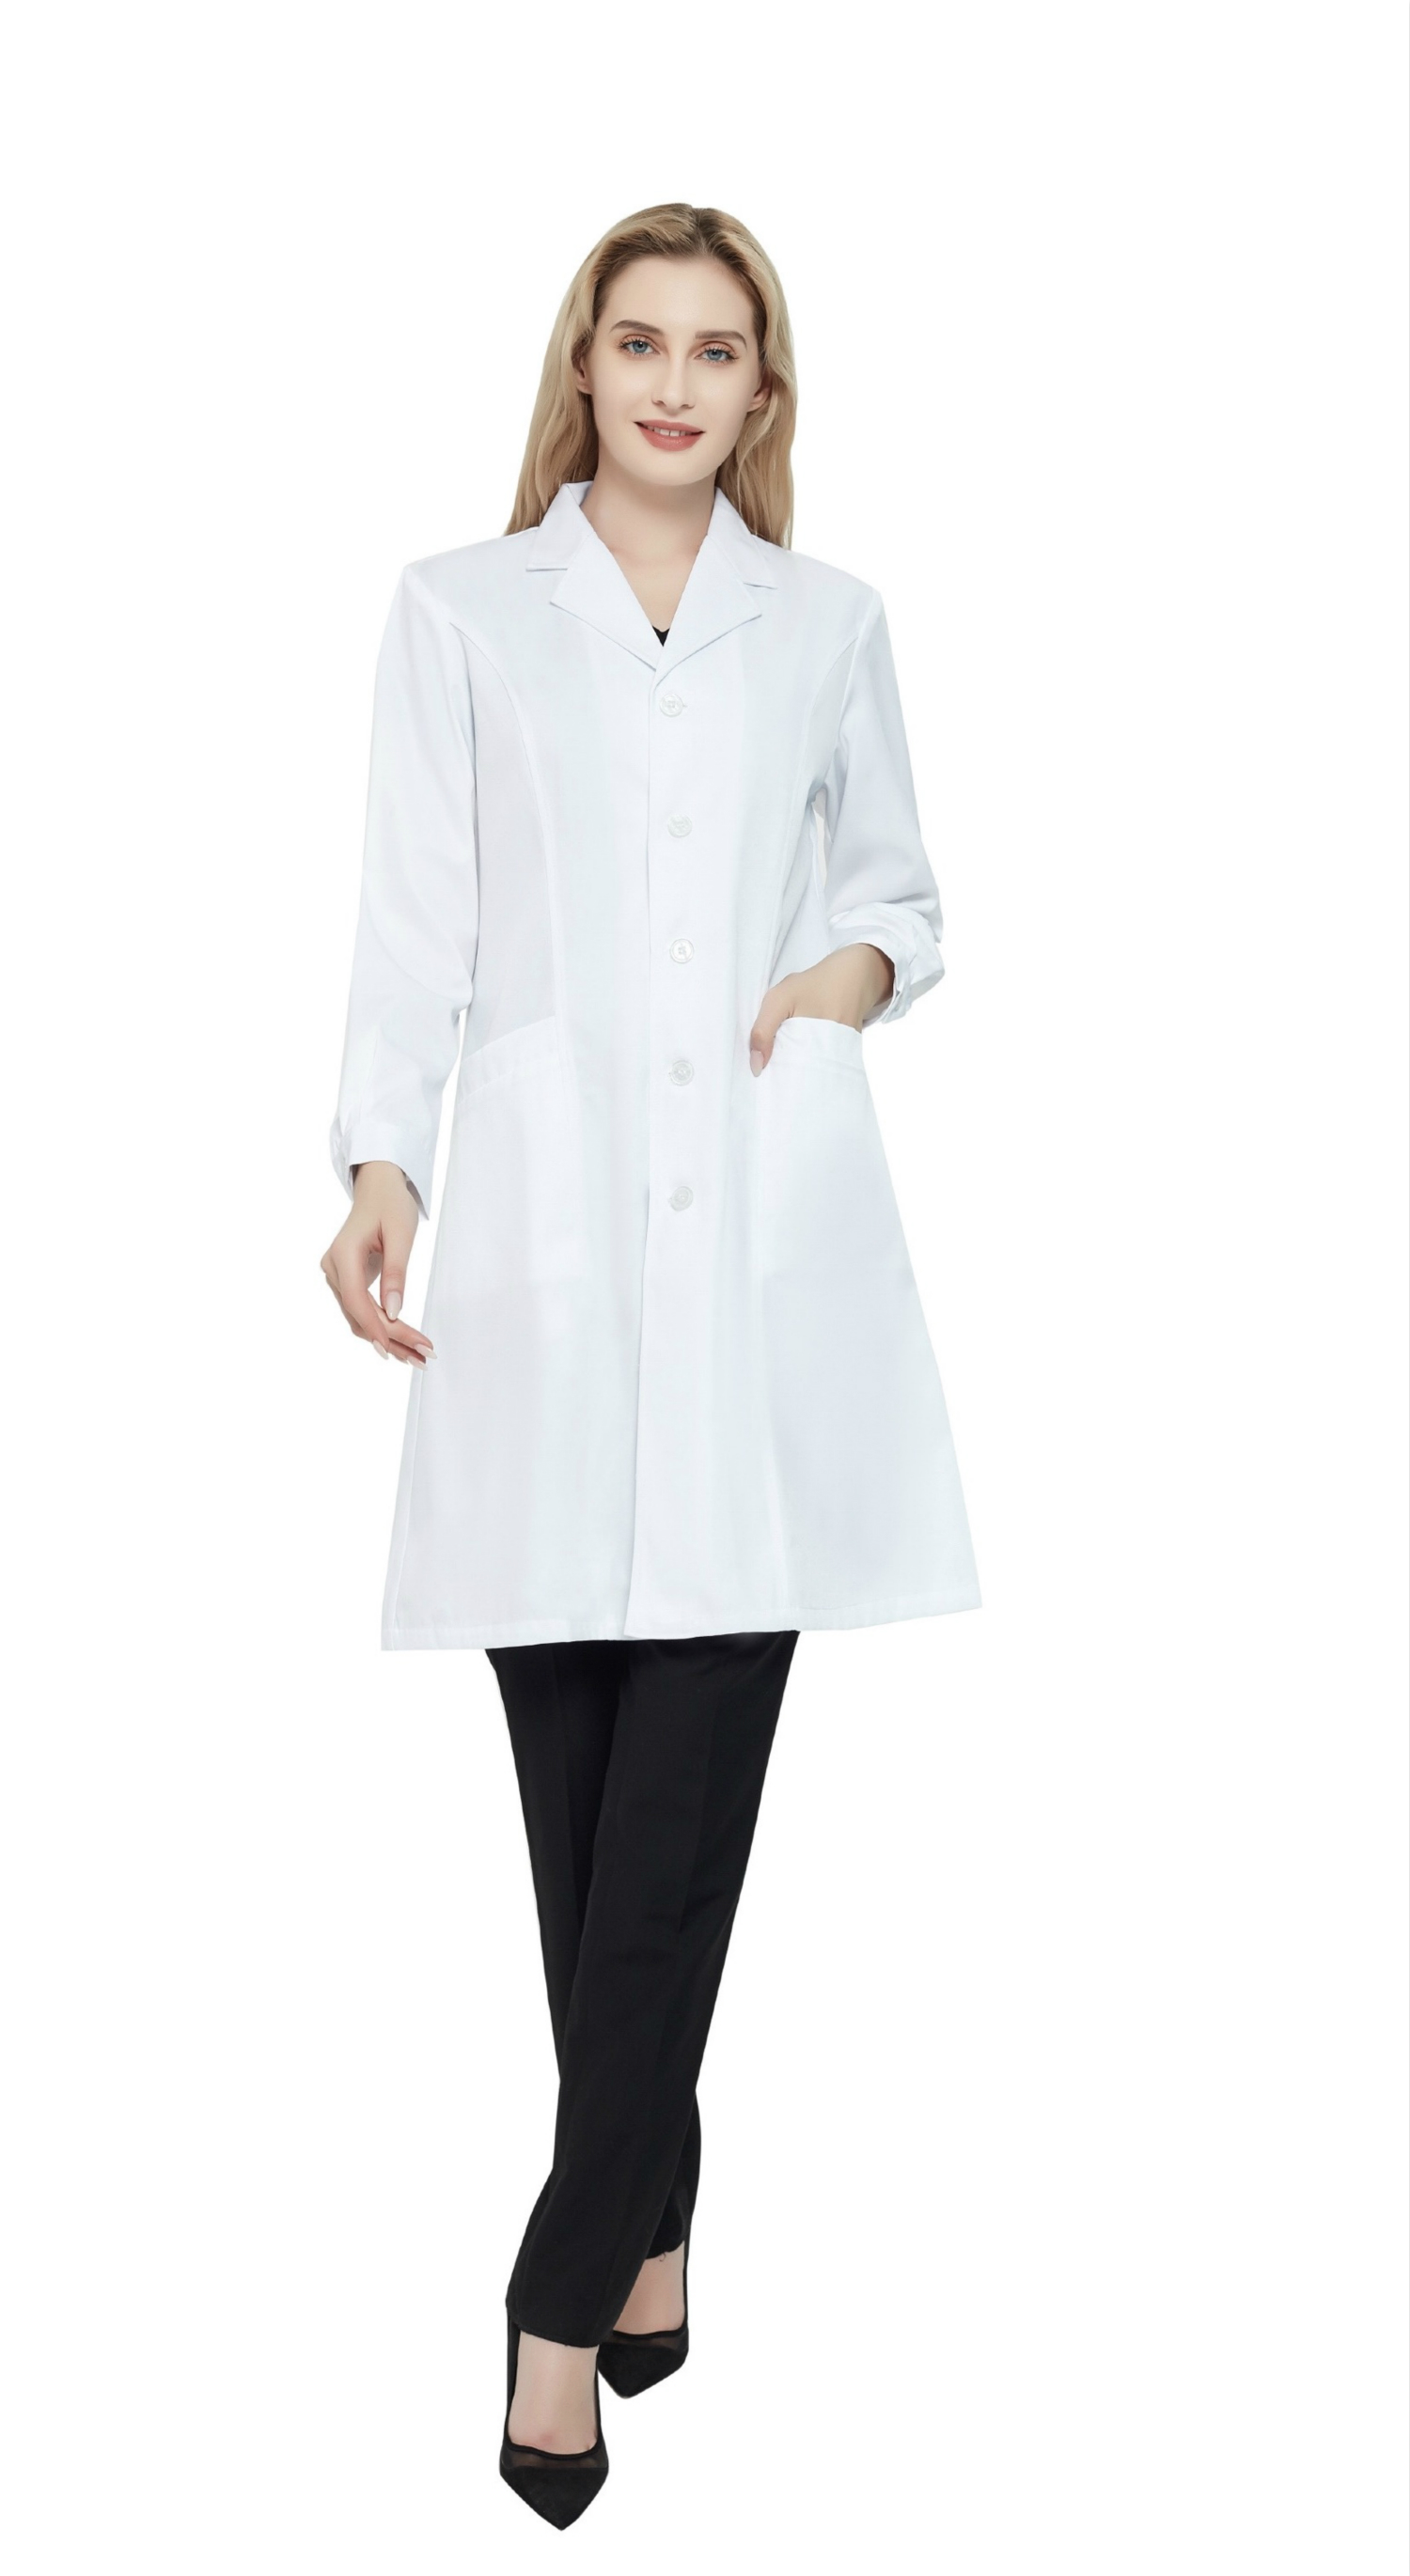 Professional Lab Coat for Women,White Medical Doctor Workwear,Slim Fit